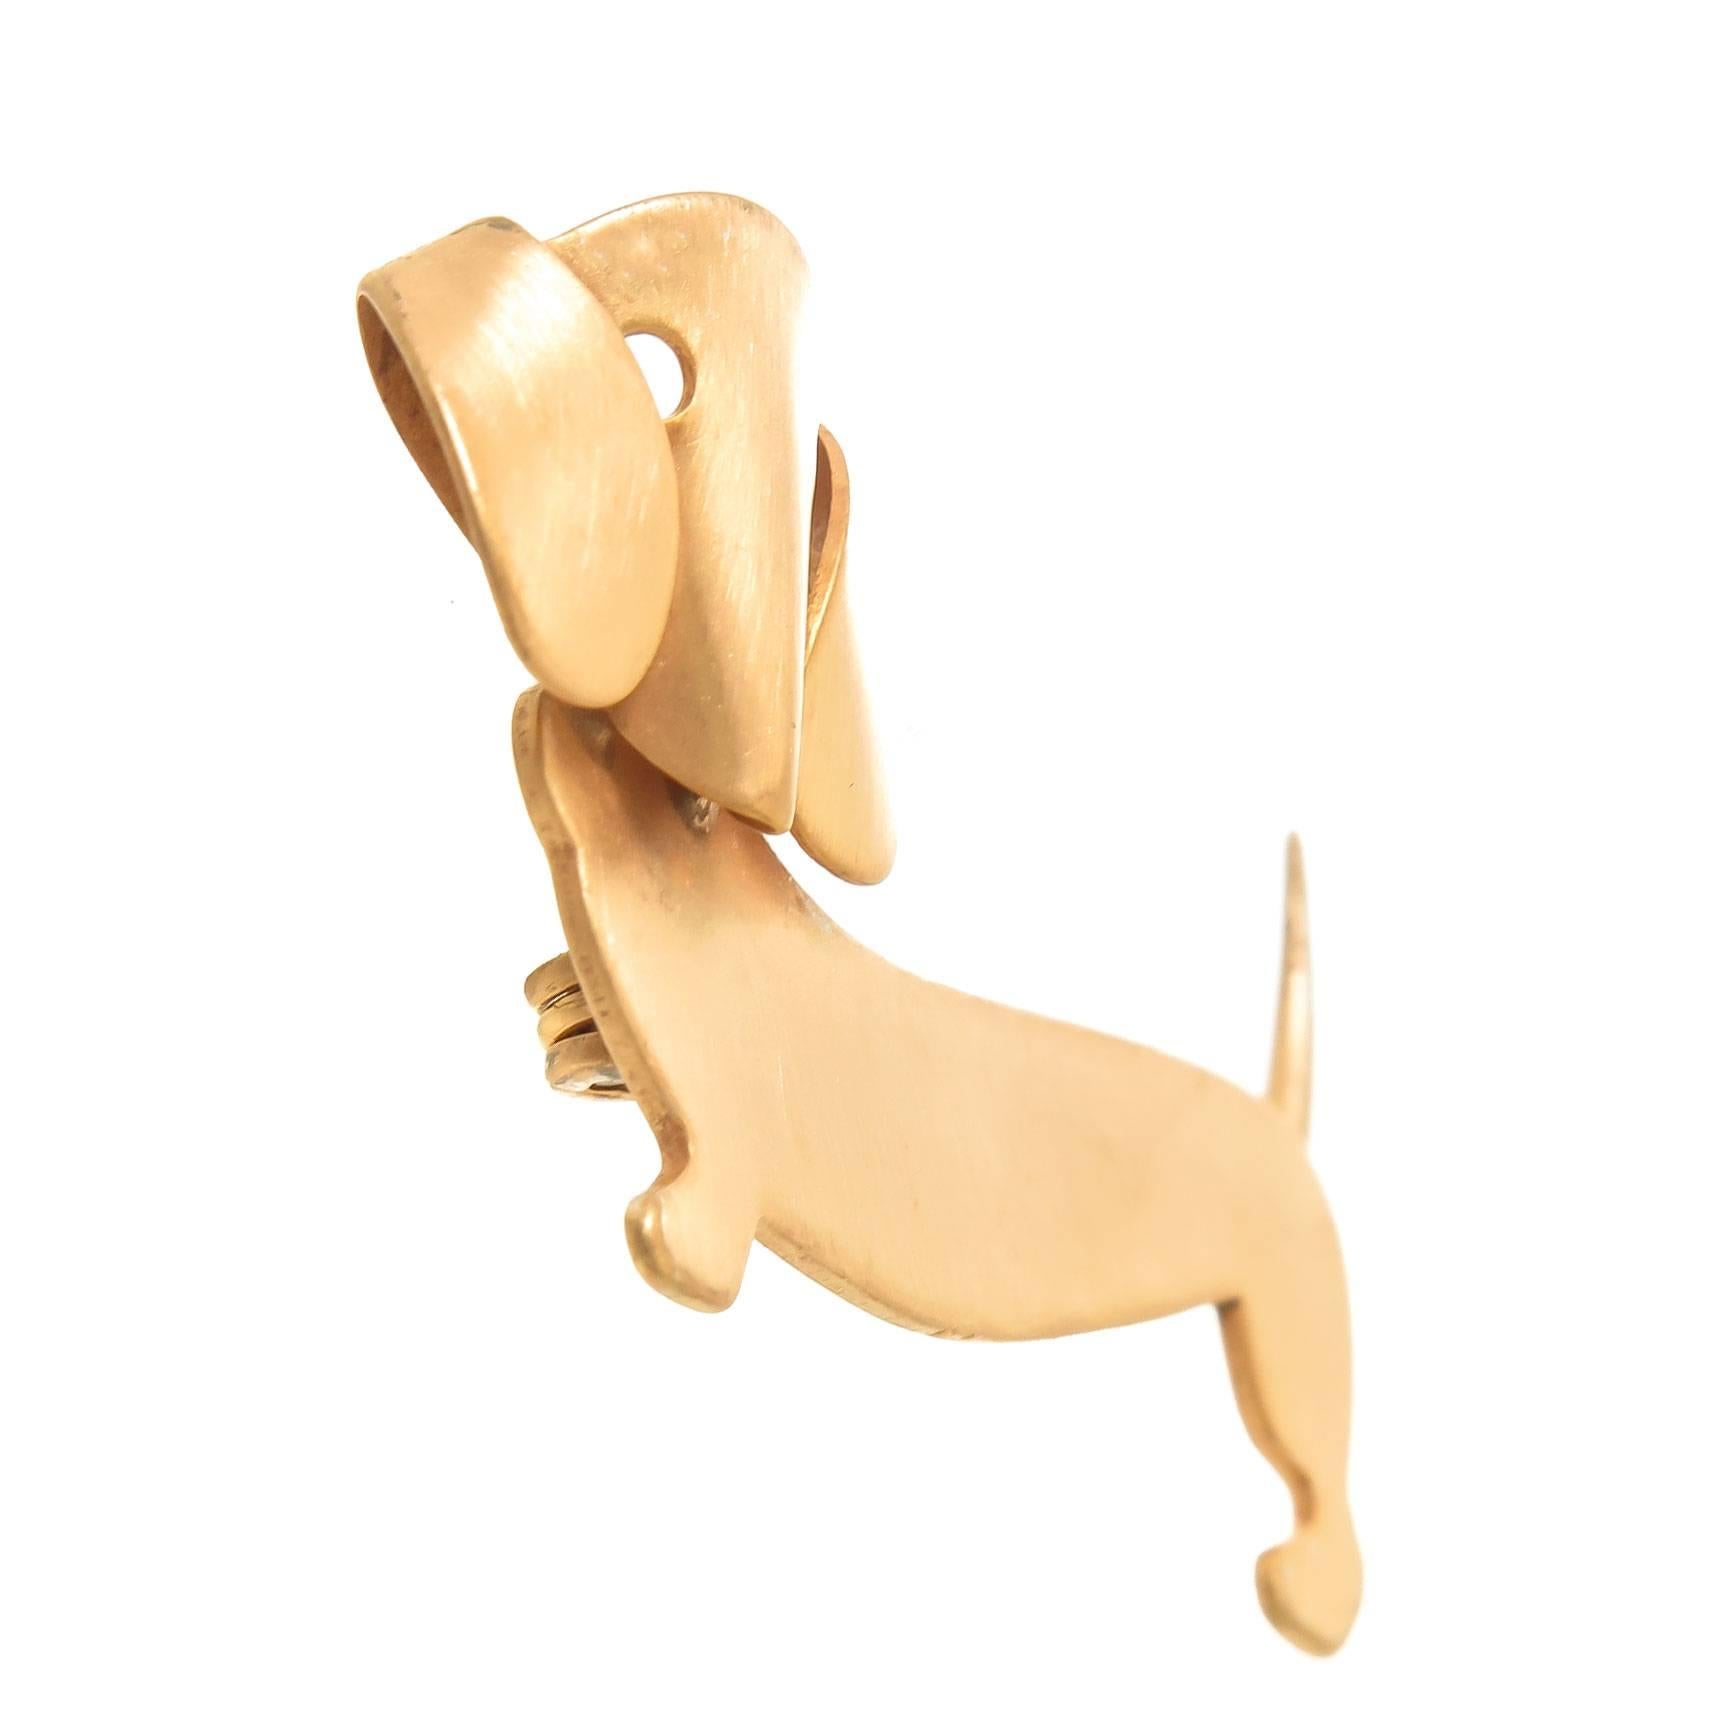 Circa 1960s Beau Gold Wash on Sterling Sterling Silver Dachshund Dog Brooch, measuring 2 inch in length x 1 inch. 